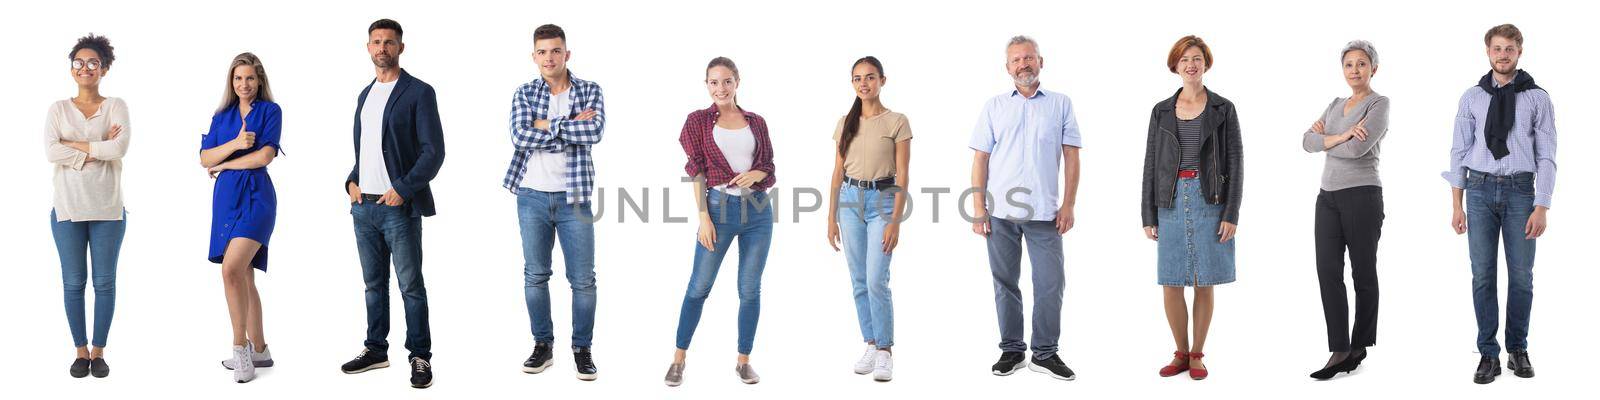 Collection set of full length portrait of people in casual clothes isolated on white background design elements